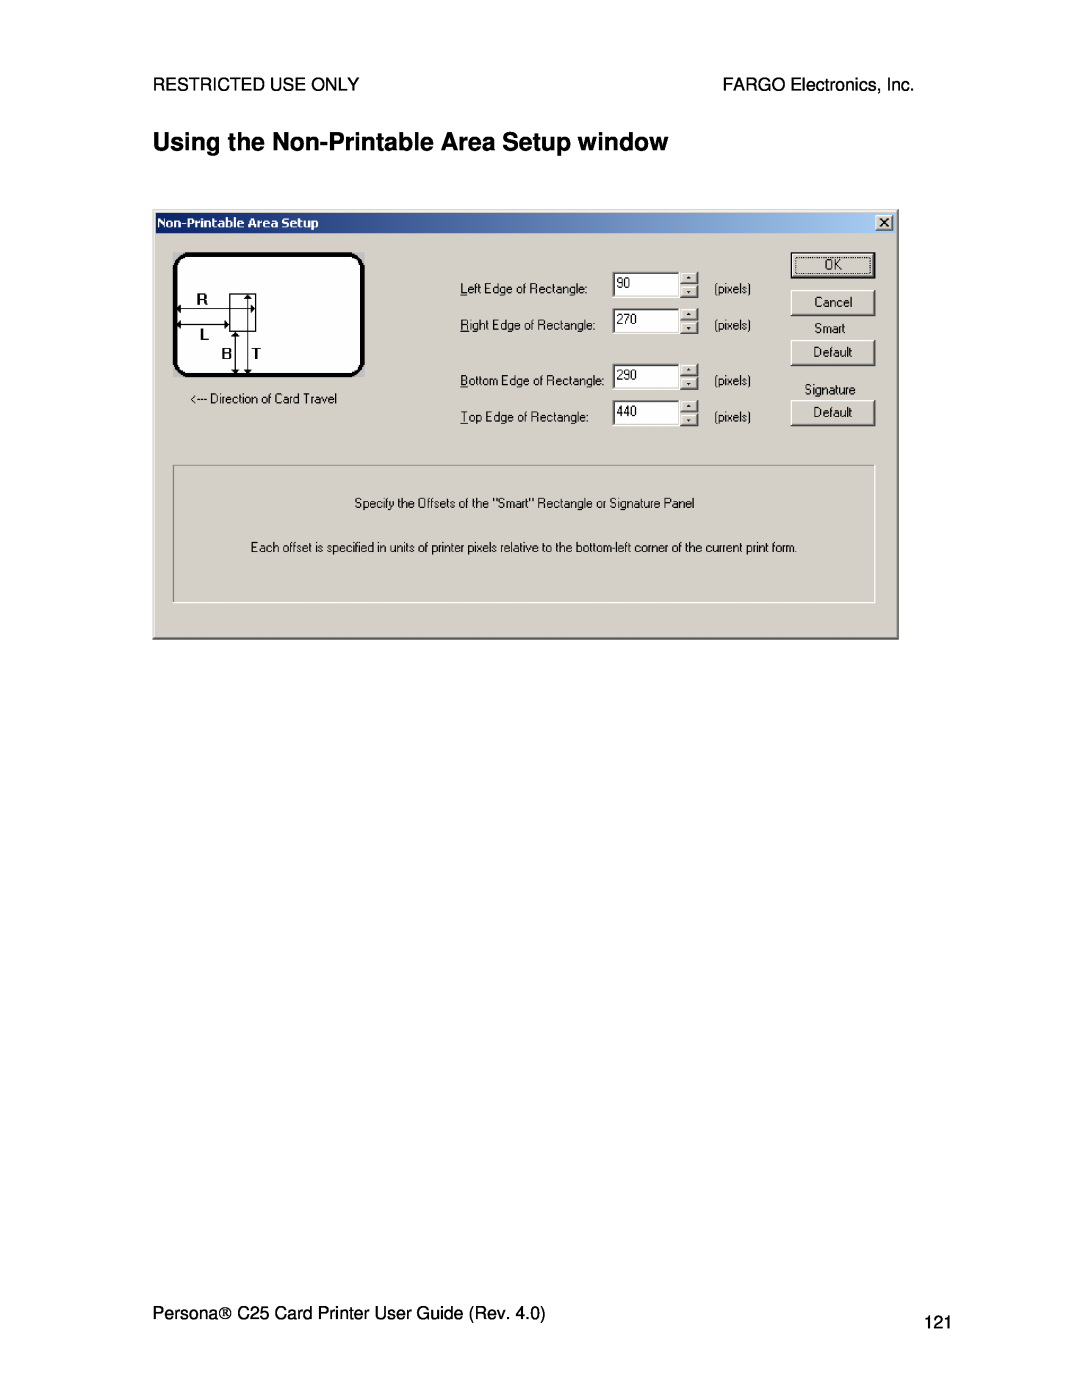 FARGO electronic S000256 manual Using the Non-Printable Area Setup window, Restricted Use Only, FARGO Electronics, Inc 